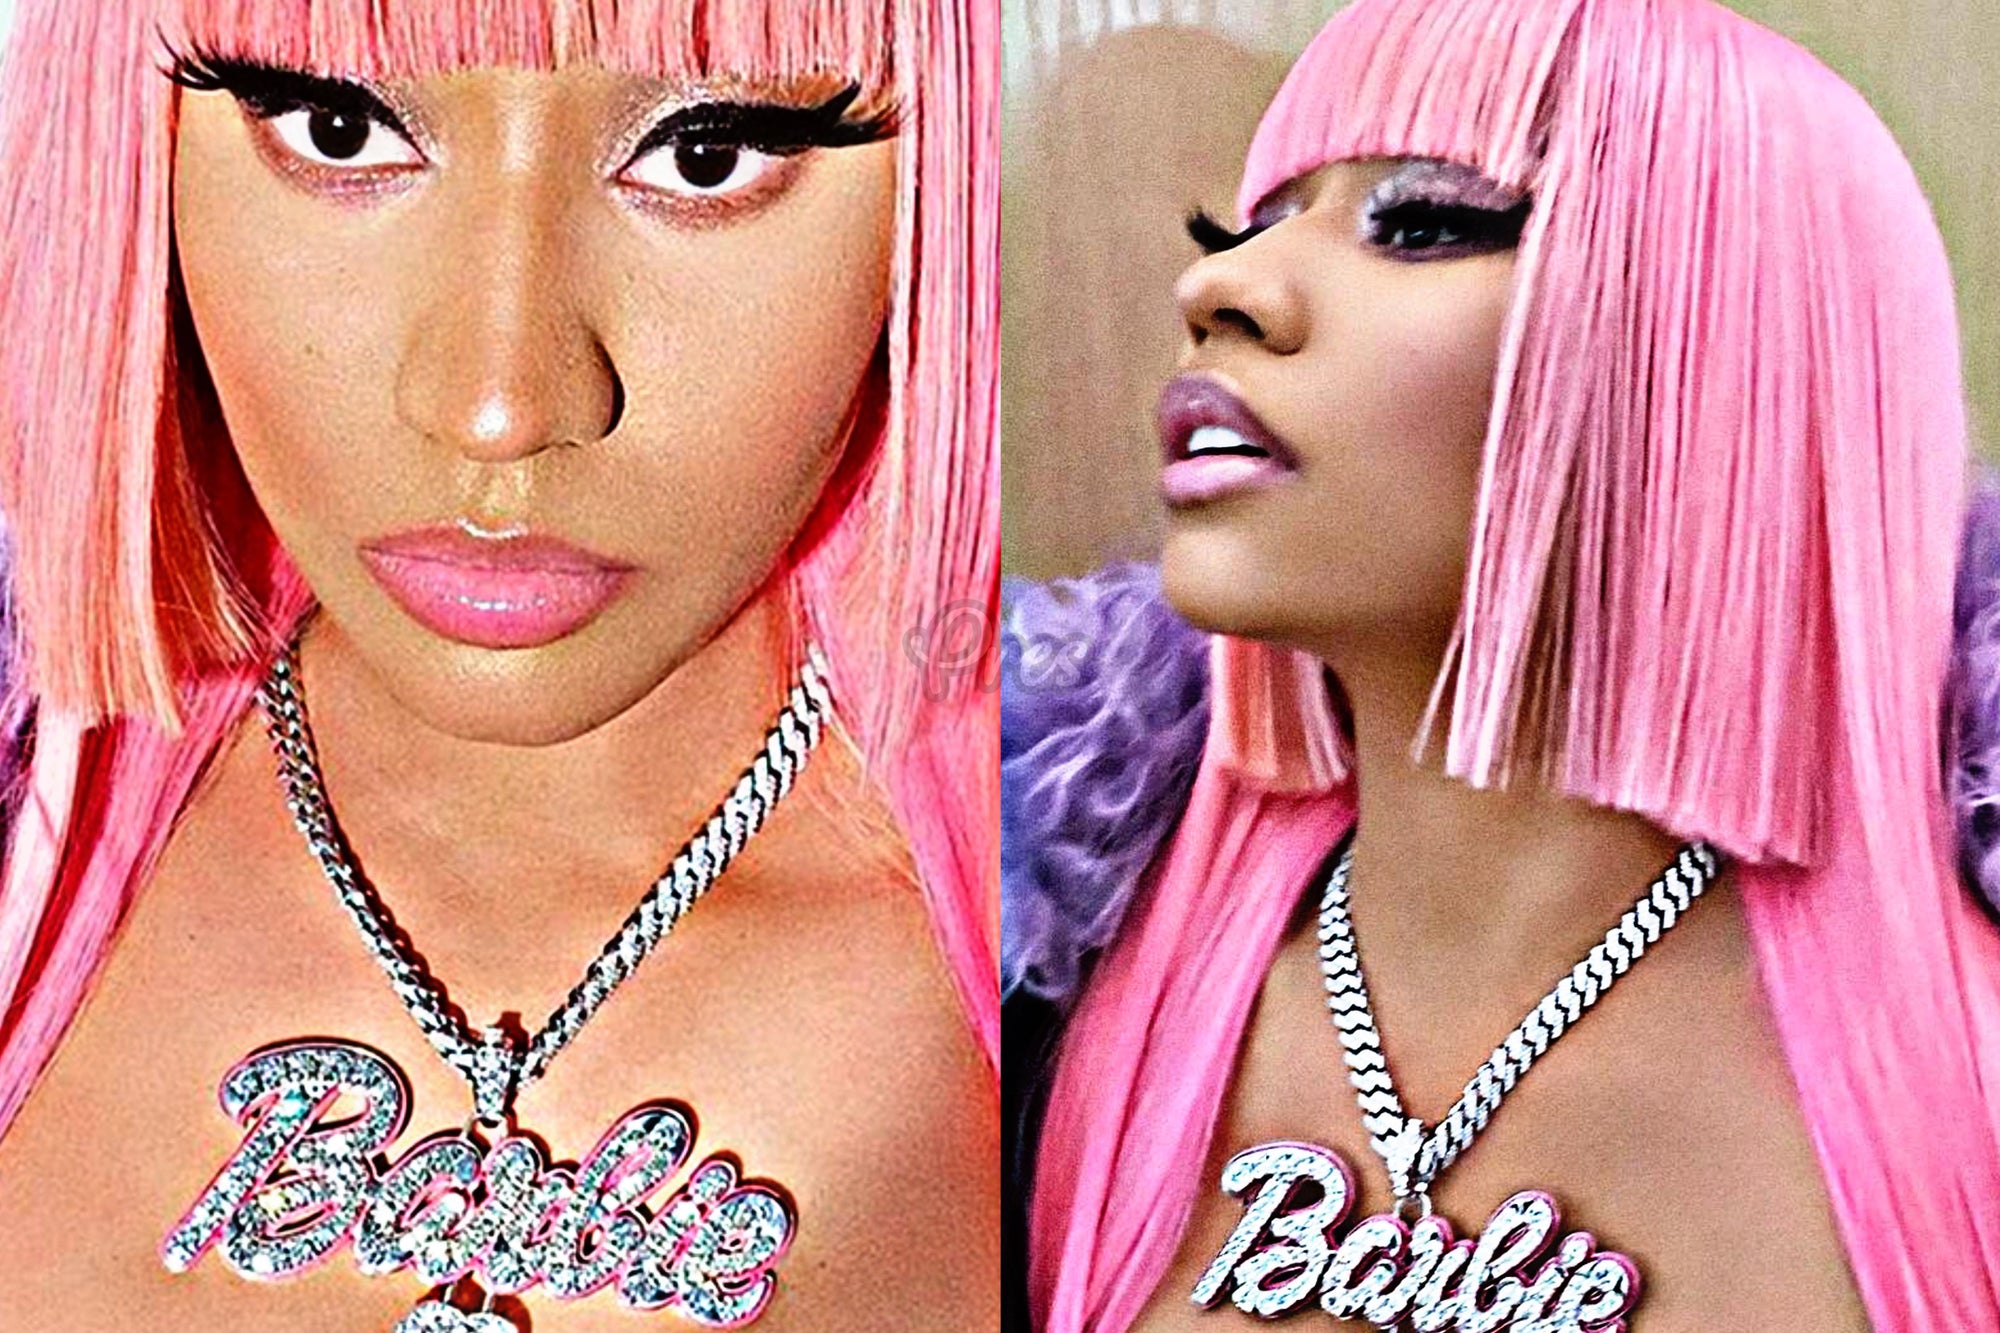 Why Is Wearing Jewelry Important For Female Rappers In The Rap Industry? Unveiling the Significance of Jewelry for Female Rappers